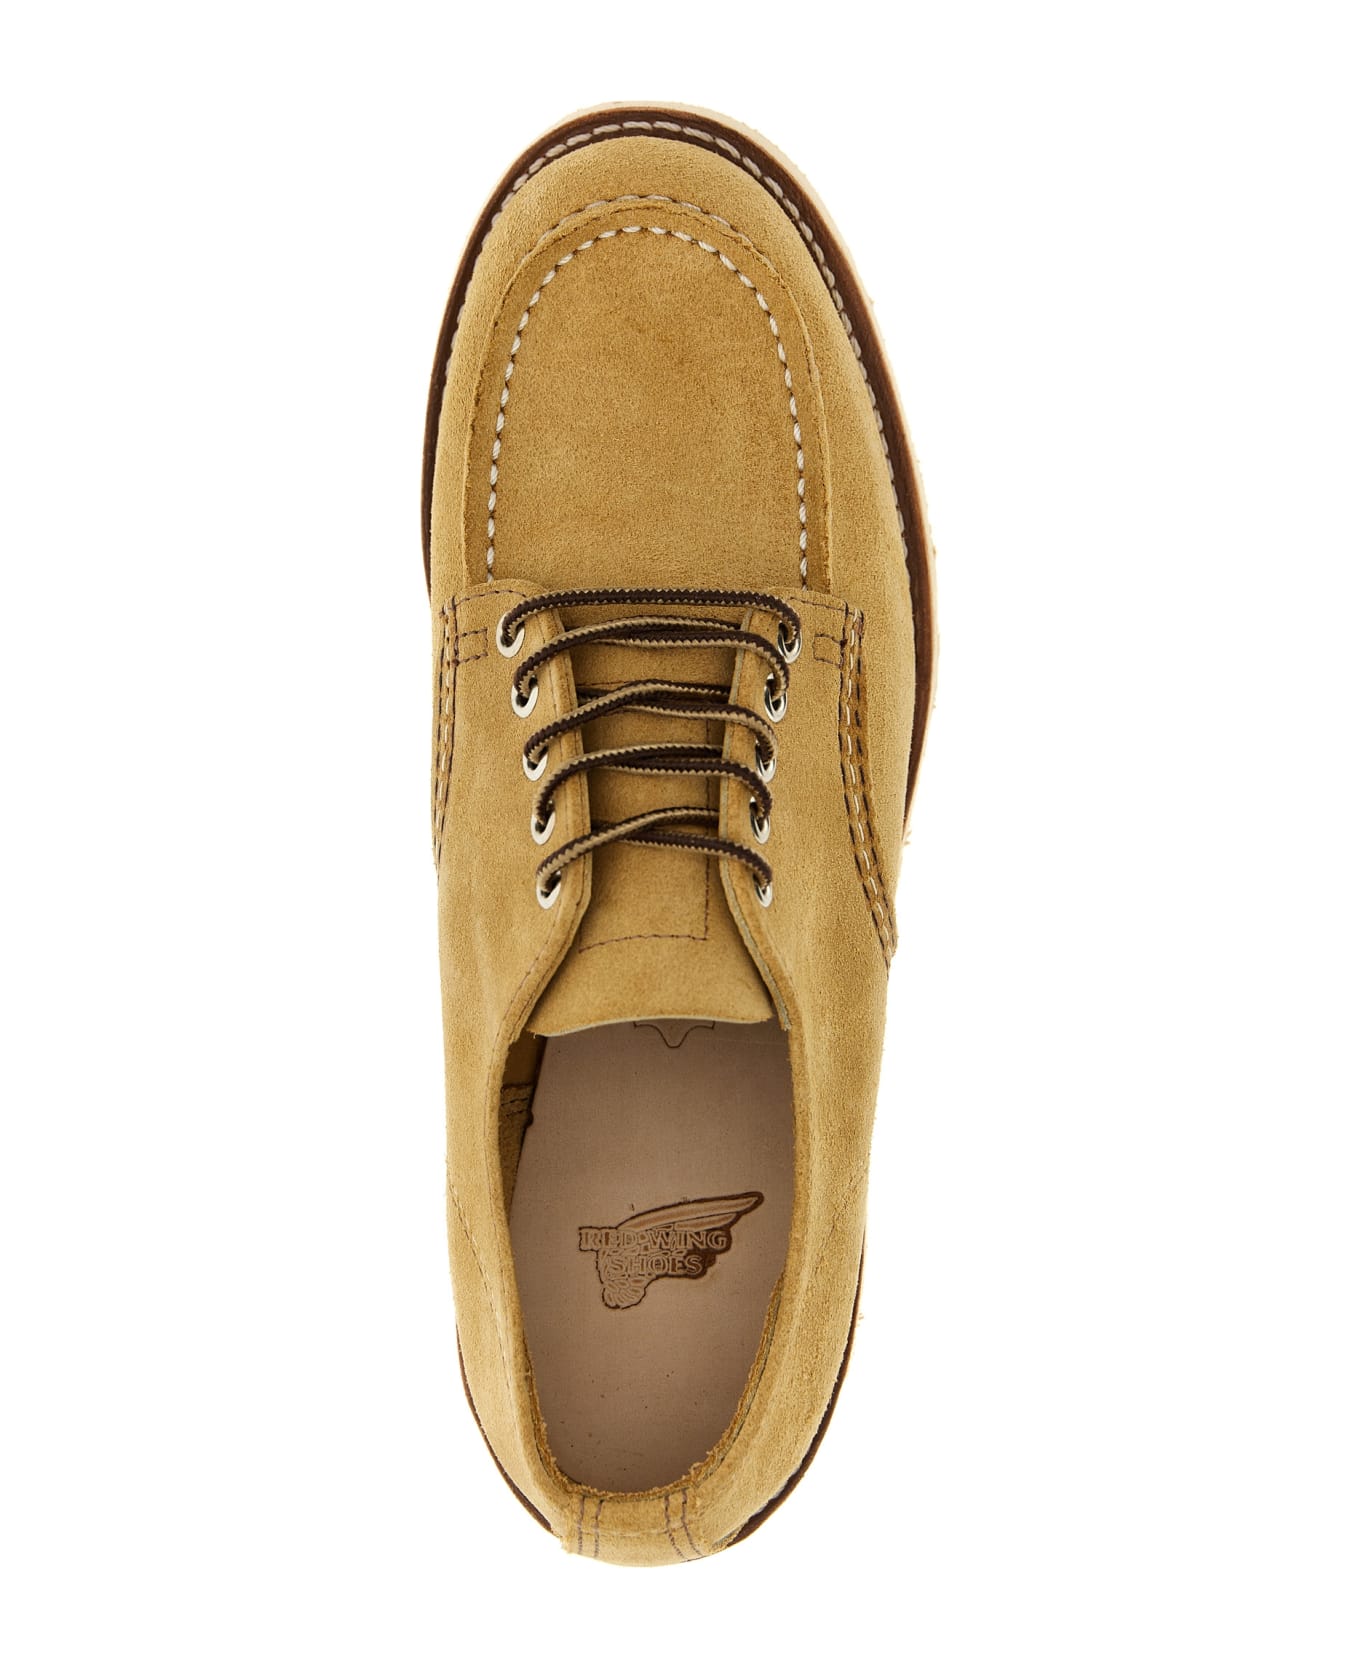 Red Wing 'shop Moc Oxford' Lace Up Shoes - Beige